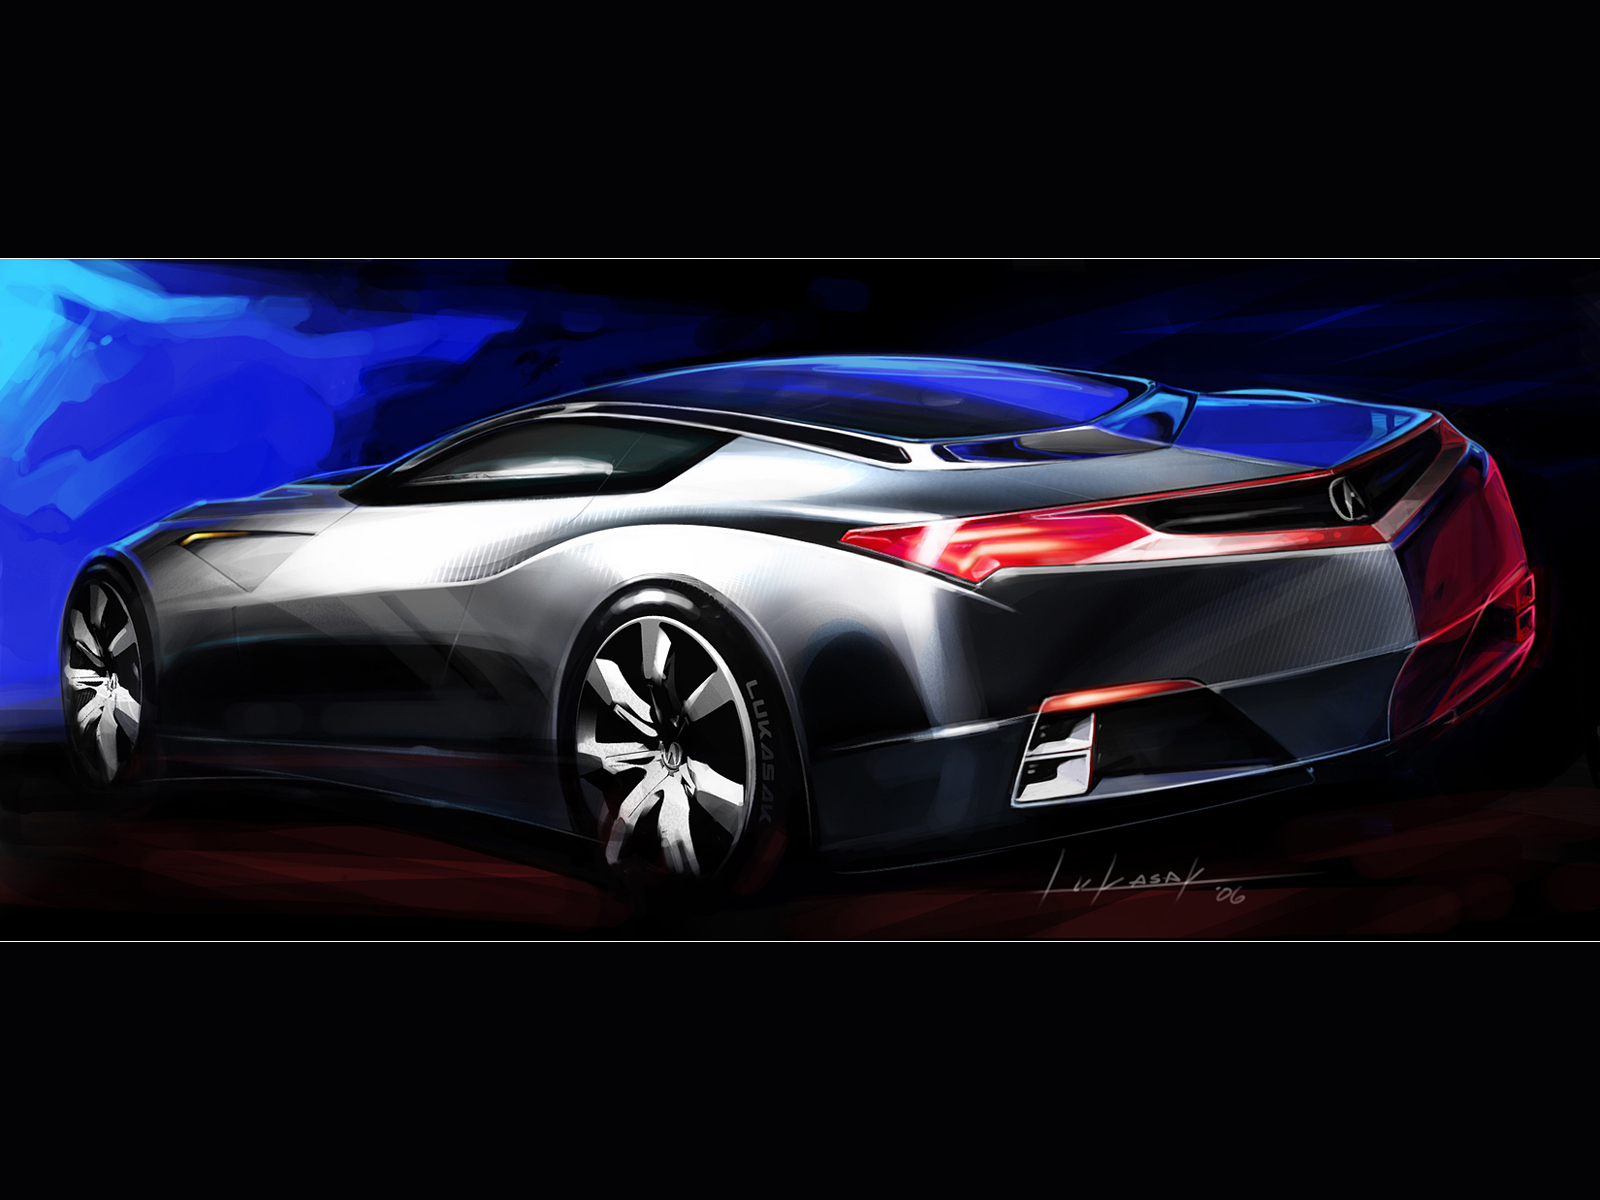 Concept Car Wallpapers High Resolution